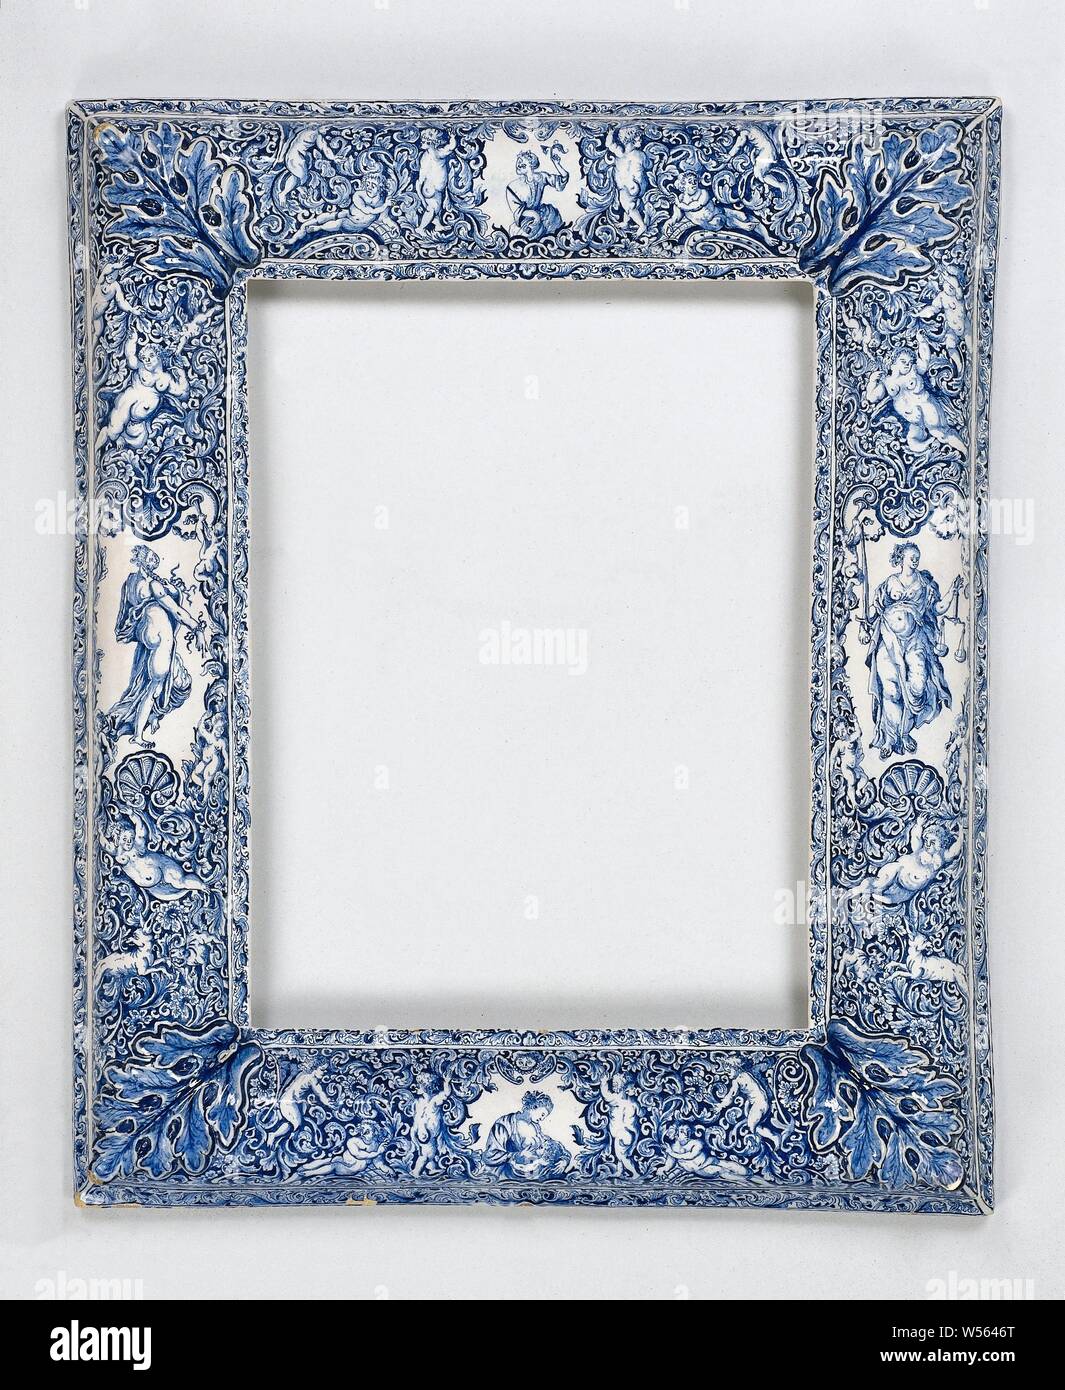 Mirror frame, painted with four allegorical female figures, Mirror frame of faience, painted in blue with four allegorical female figures, Prudence, 'Prudentia', 'Prudenza' (Ripa), one of the Four Cardinal Virtues, Justice, 'Justitia', 'Giustitia divina' (Ripa), Charity, 'Caritas', 'Carità' (Ripa), one of the Three Theological Virtues, Temperance, 'Temperantia', 'Temperanza' (Ripa), De Witte Starre (attributed to), Delft, 1736, h 65 cm × w 54 cm Stock Photo